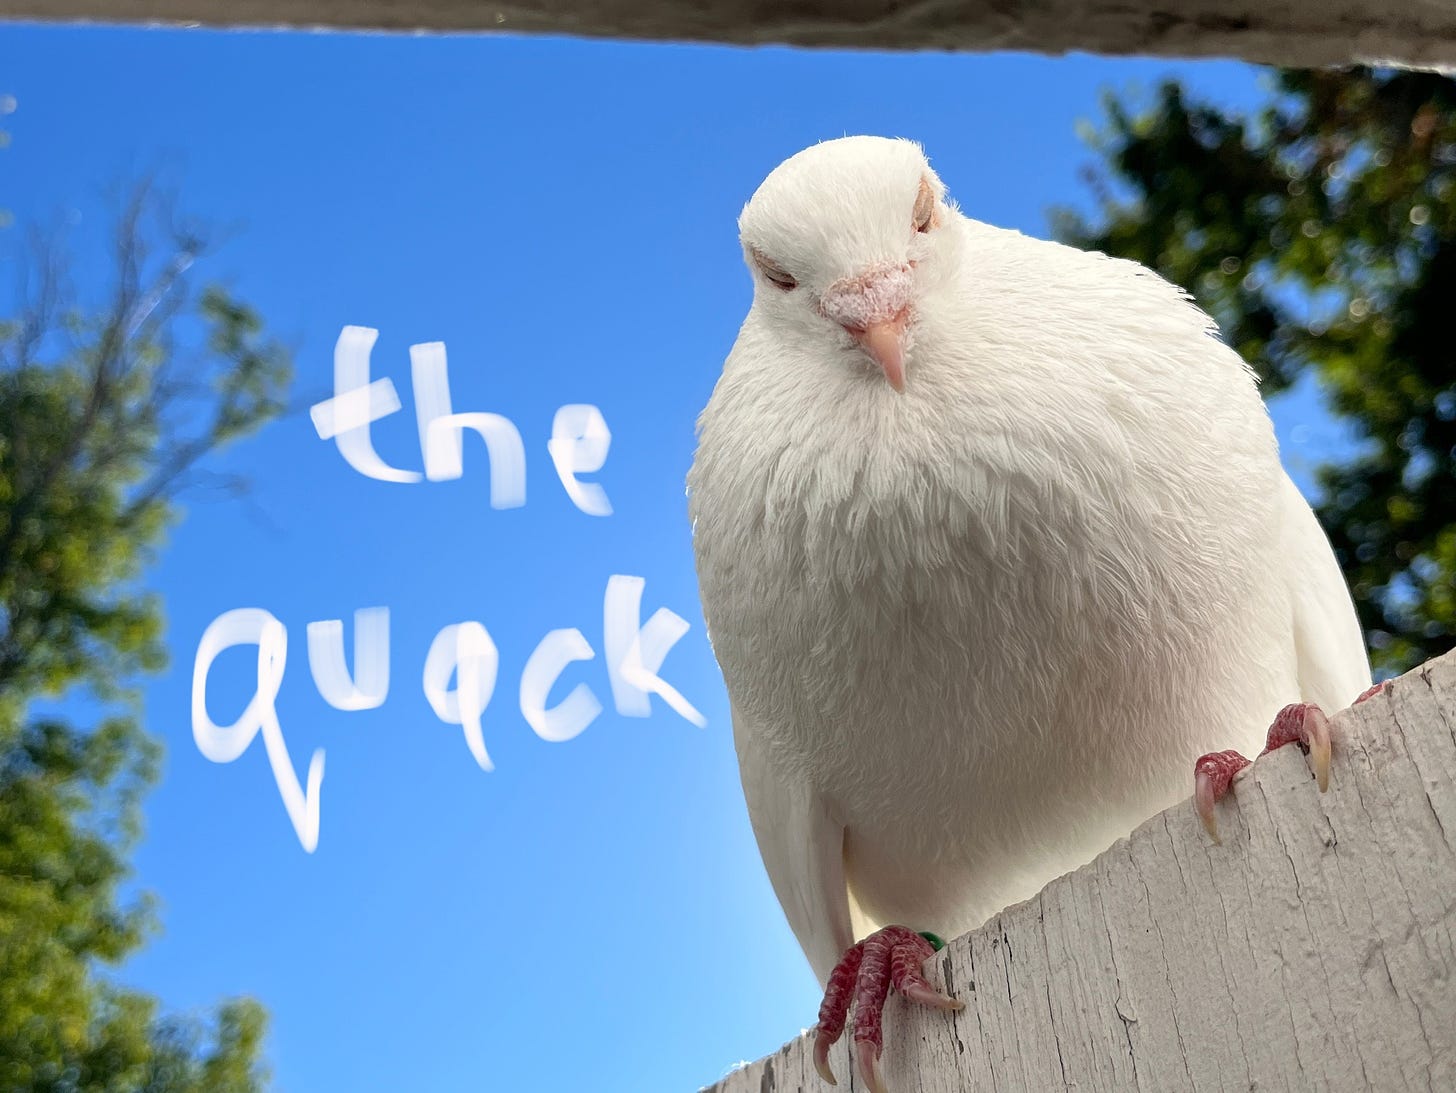 A white pigeon glares down from the top of a door. the words "the quack" are written in whispy white letters across the blue sky